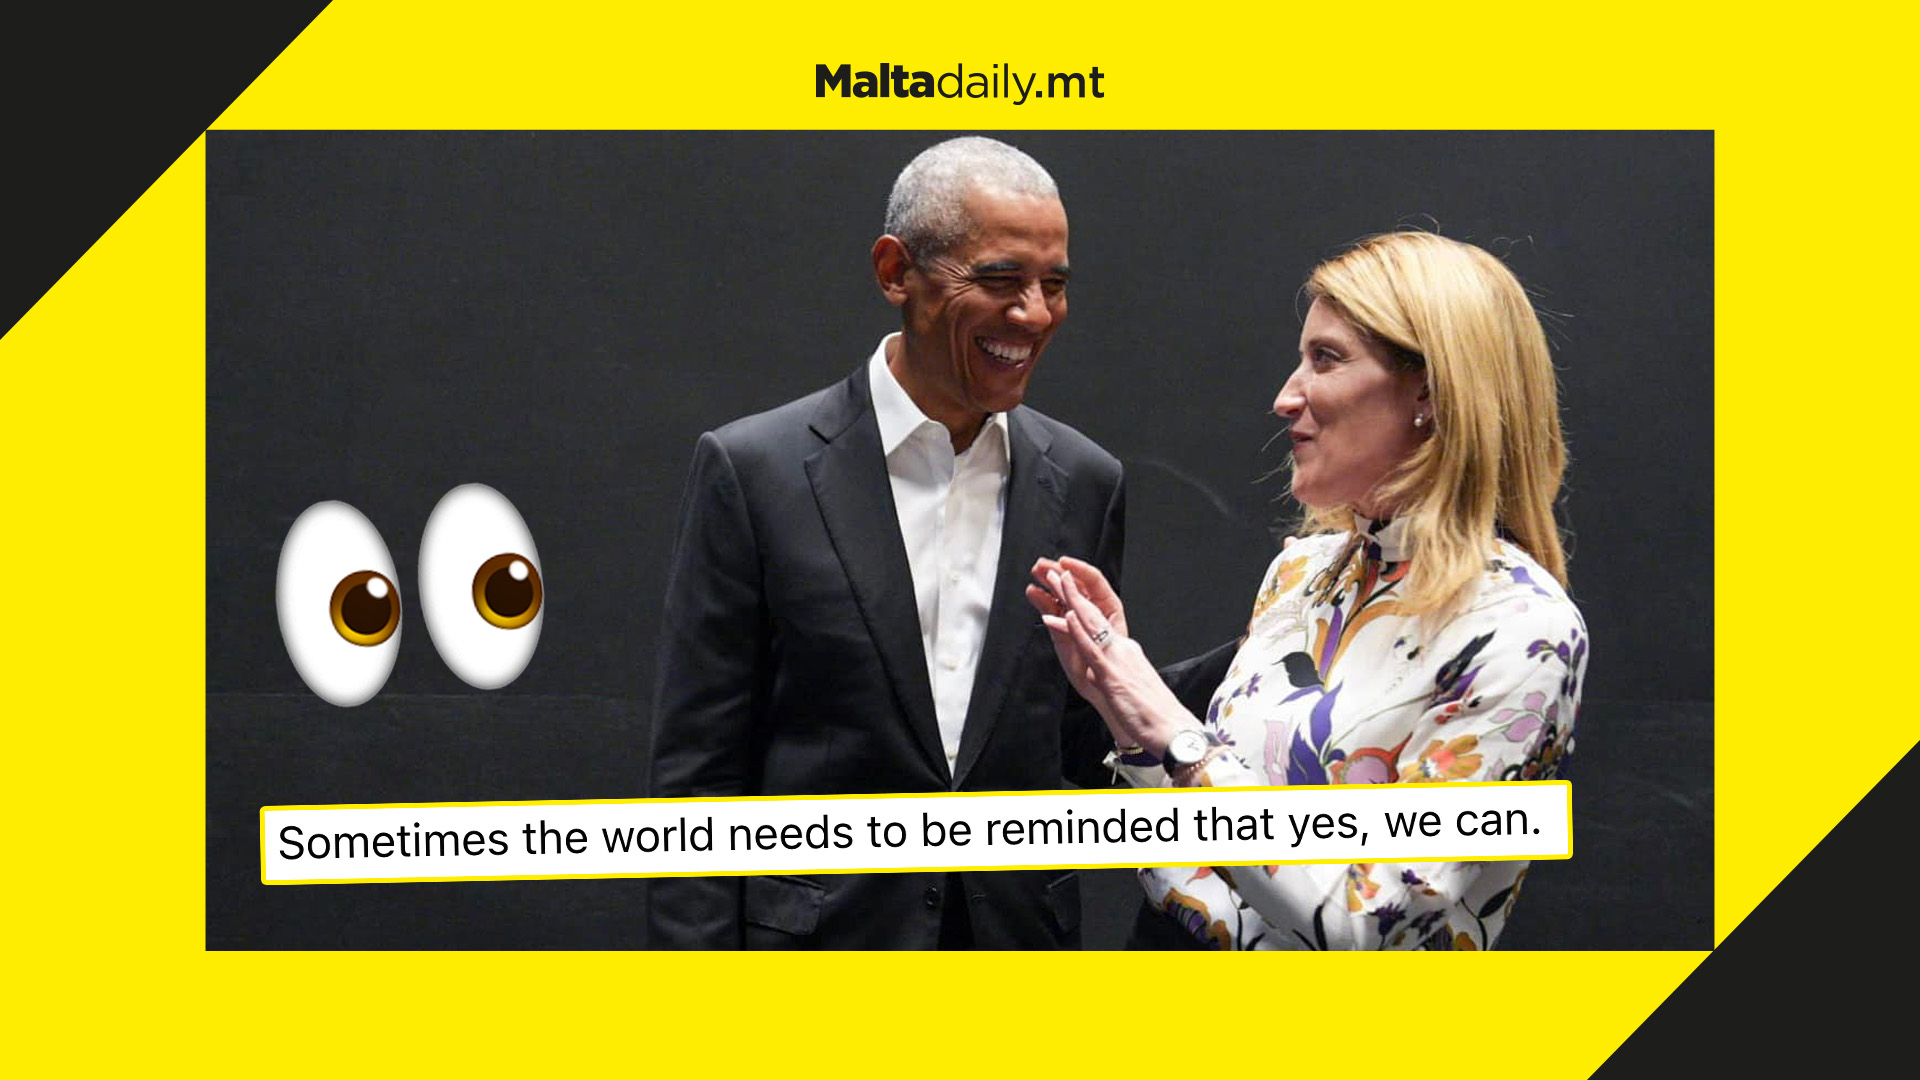 Roberta Metsola meets Barack Obama in Copenhagen to remind world that "yes, we can"